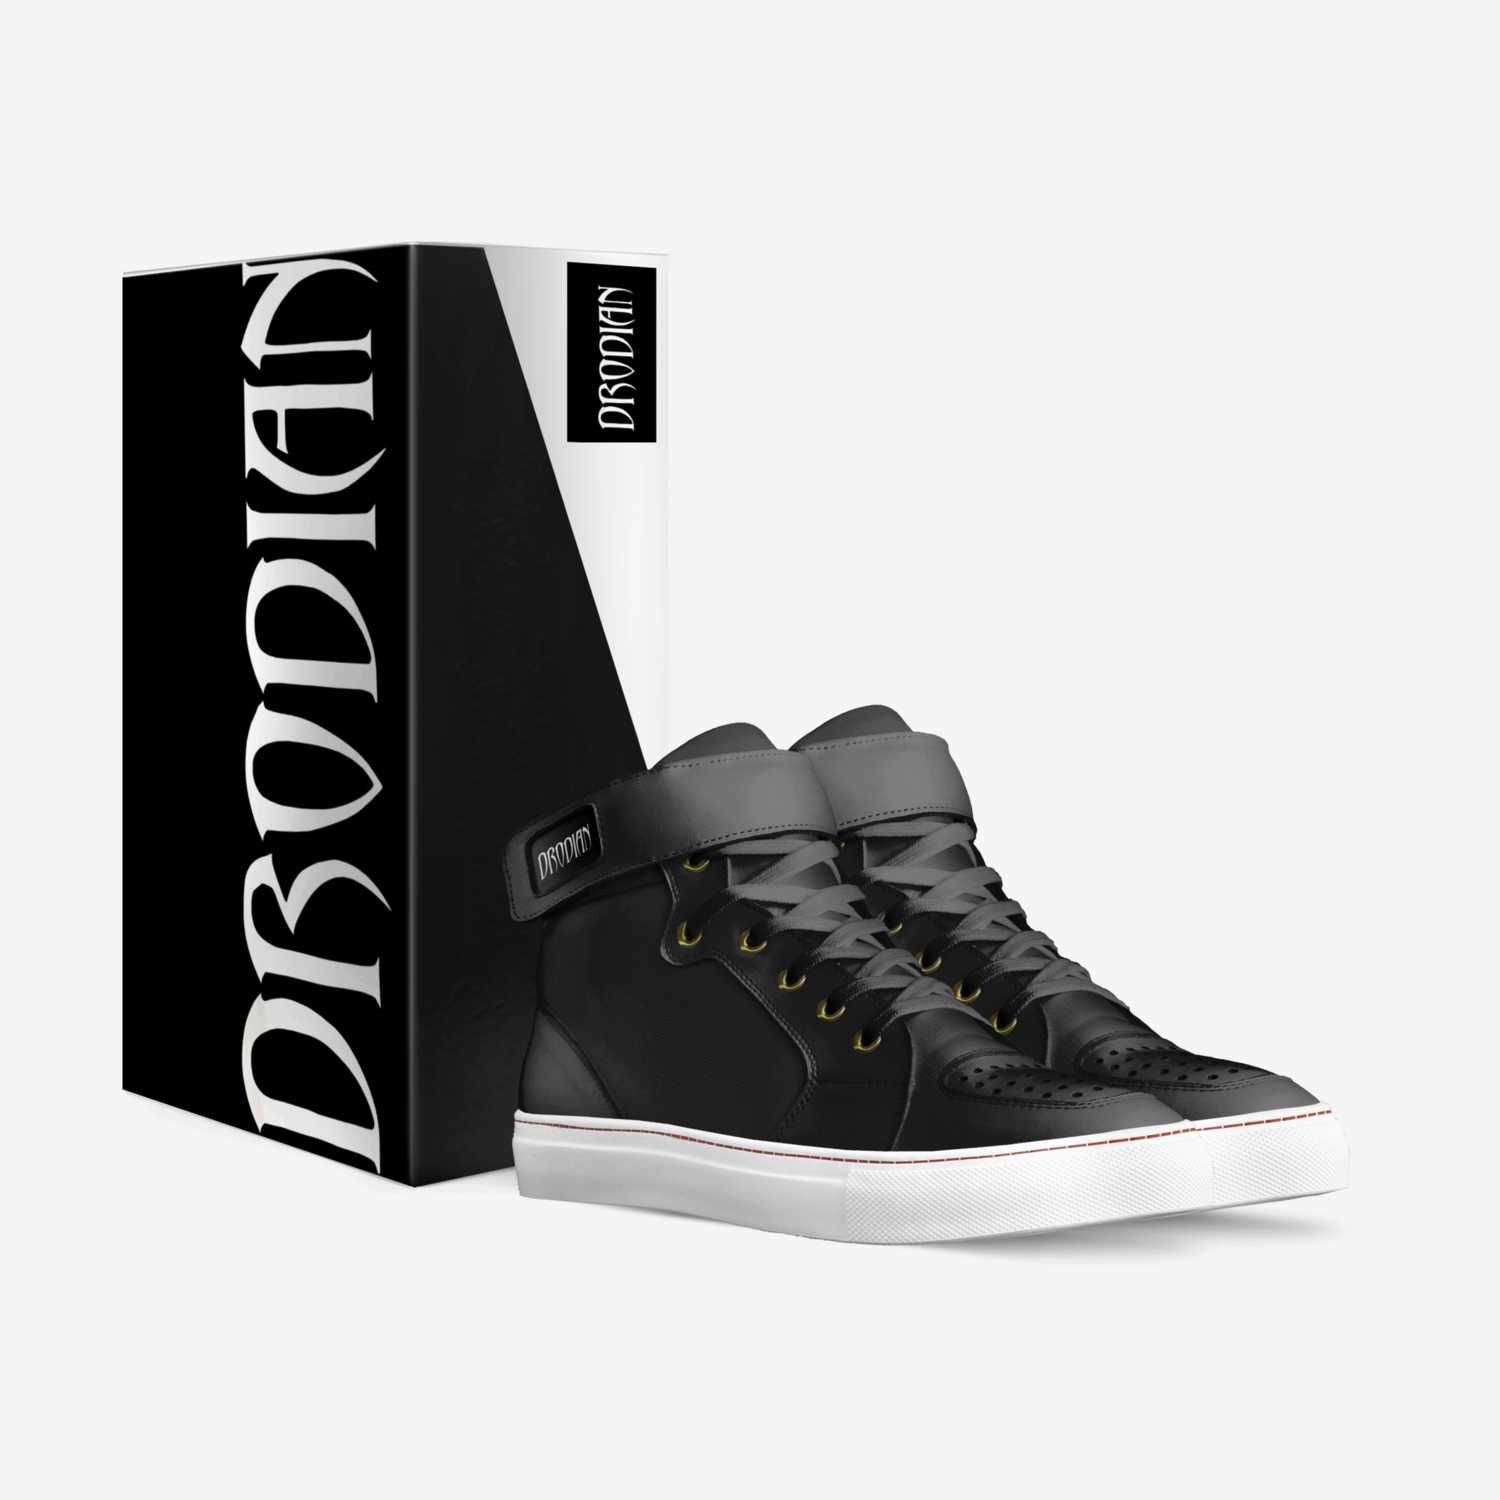 Drodian custom made in Italy shoes by Aaron Lucas | Box view